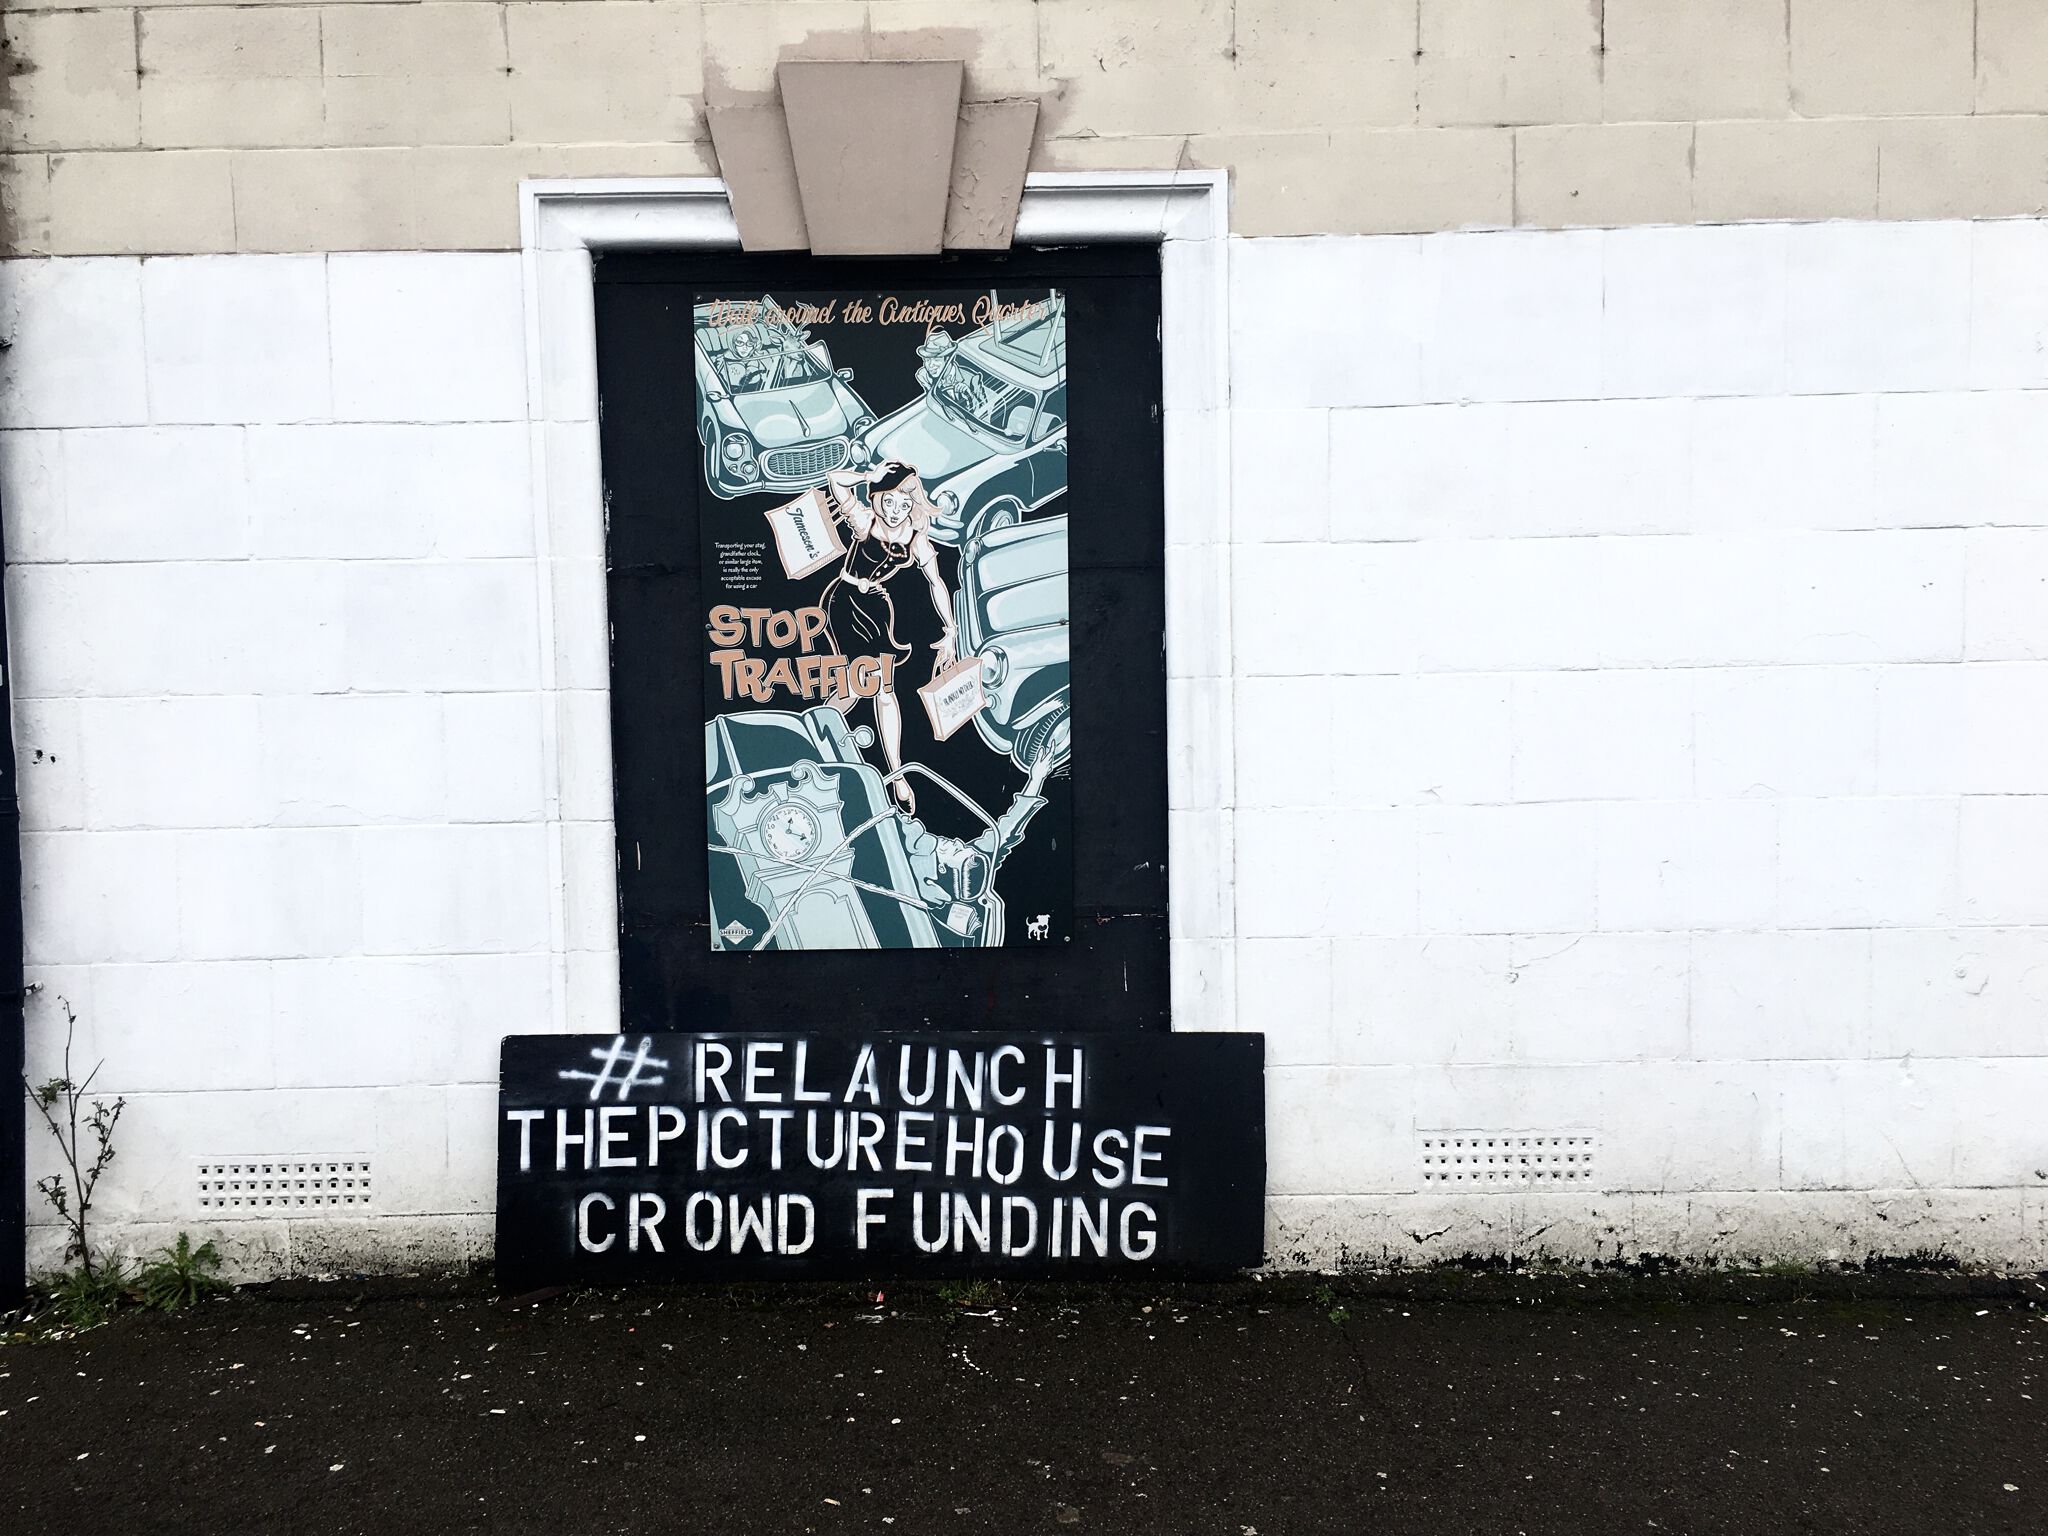 Unknown - Sheffield&mdash;Relaunch the picturehouse crouwd funding